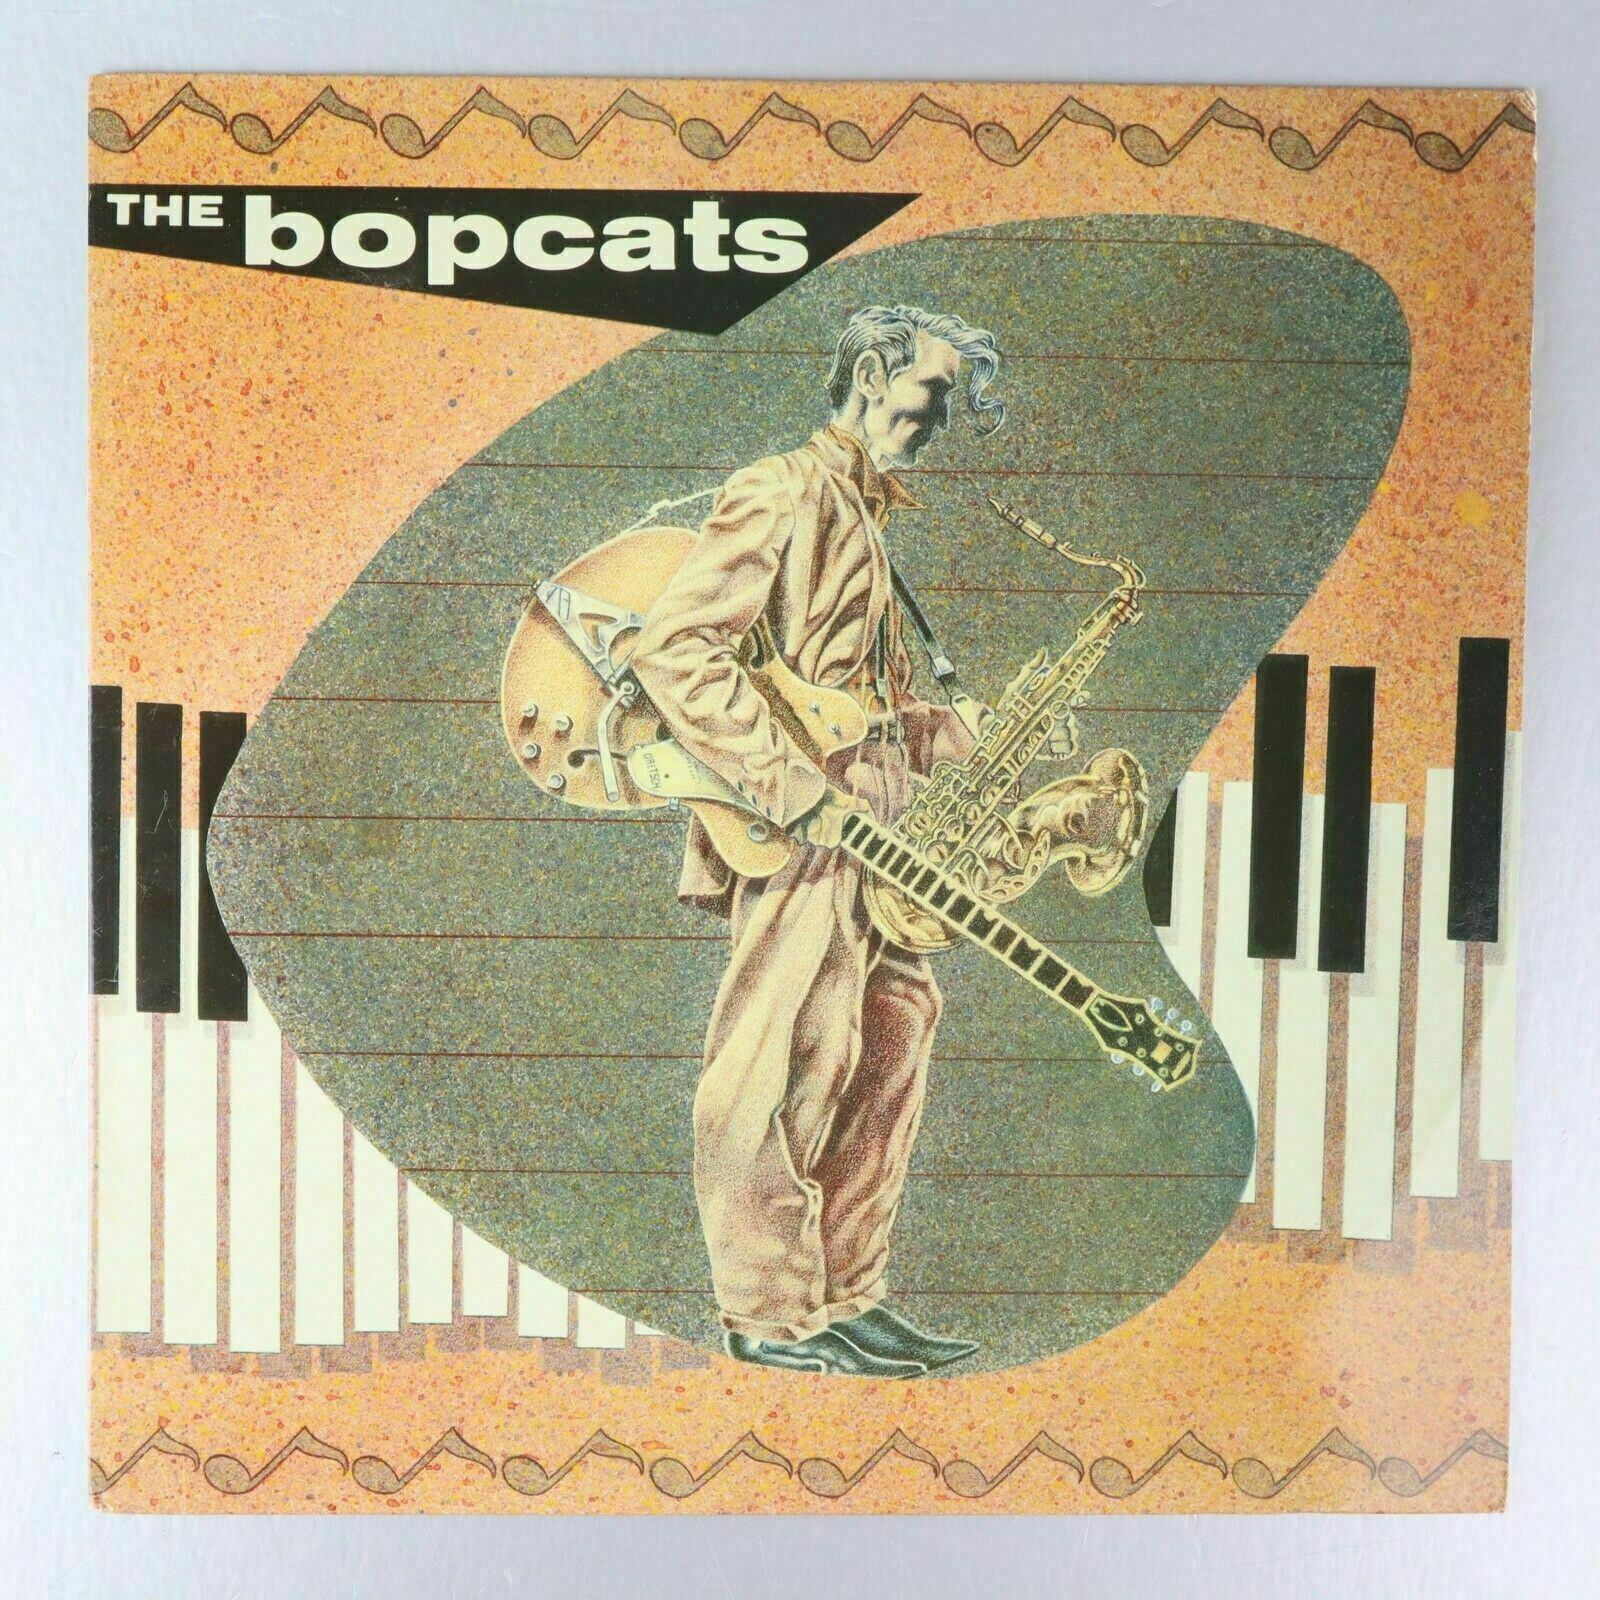 RARE - The Bobcats LP Vinyl Record (PROMO) w/Photos and Promotional information